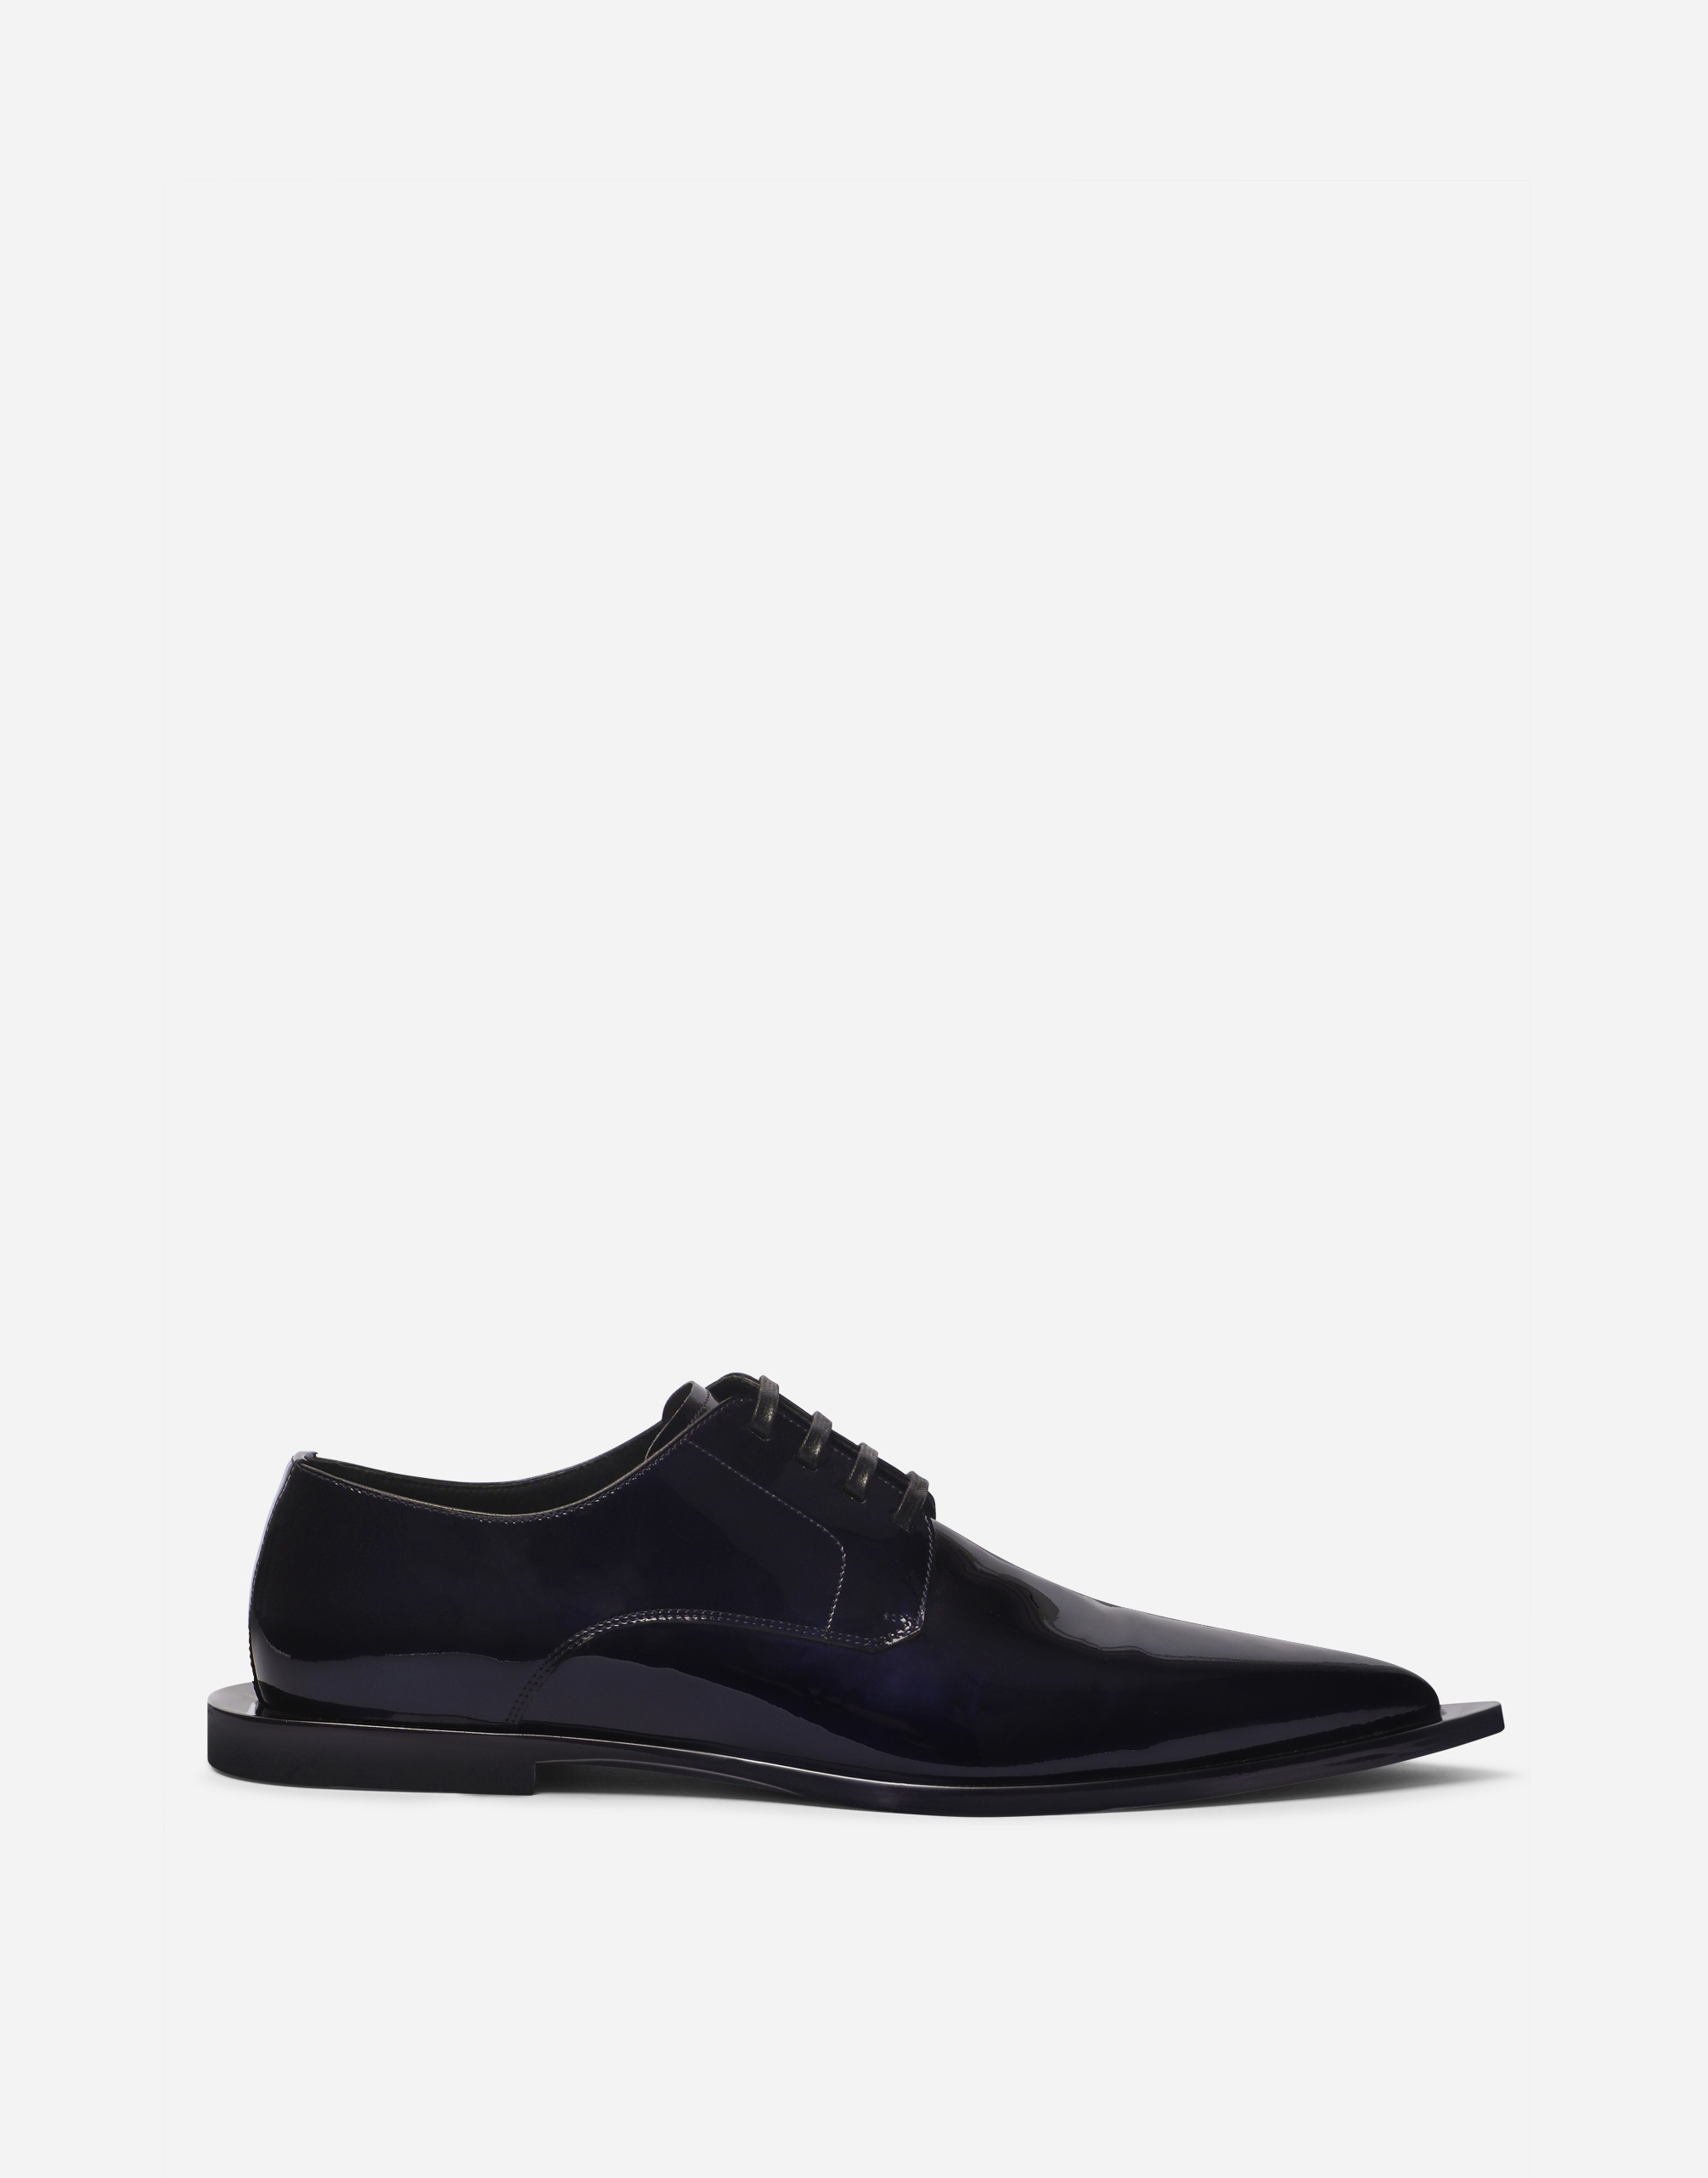 Dolce & Gabbana Metallic Patent Leather Derby Shoes In Blue